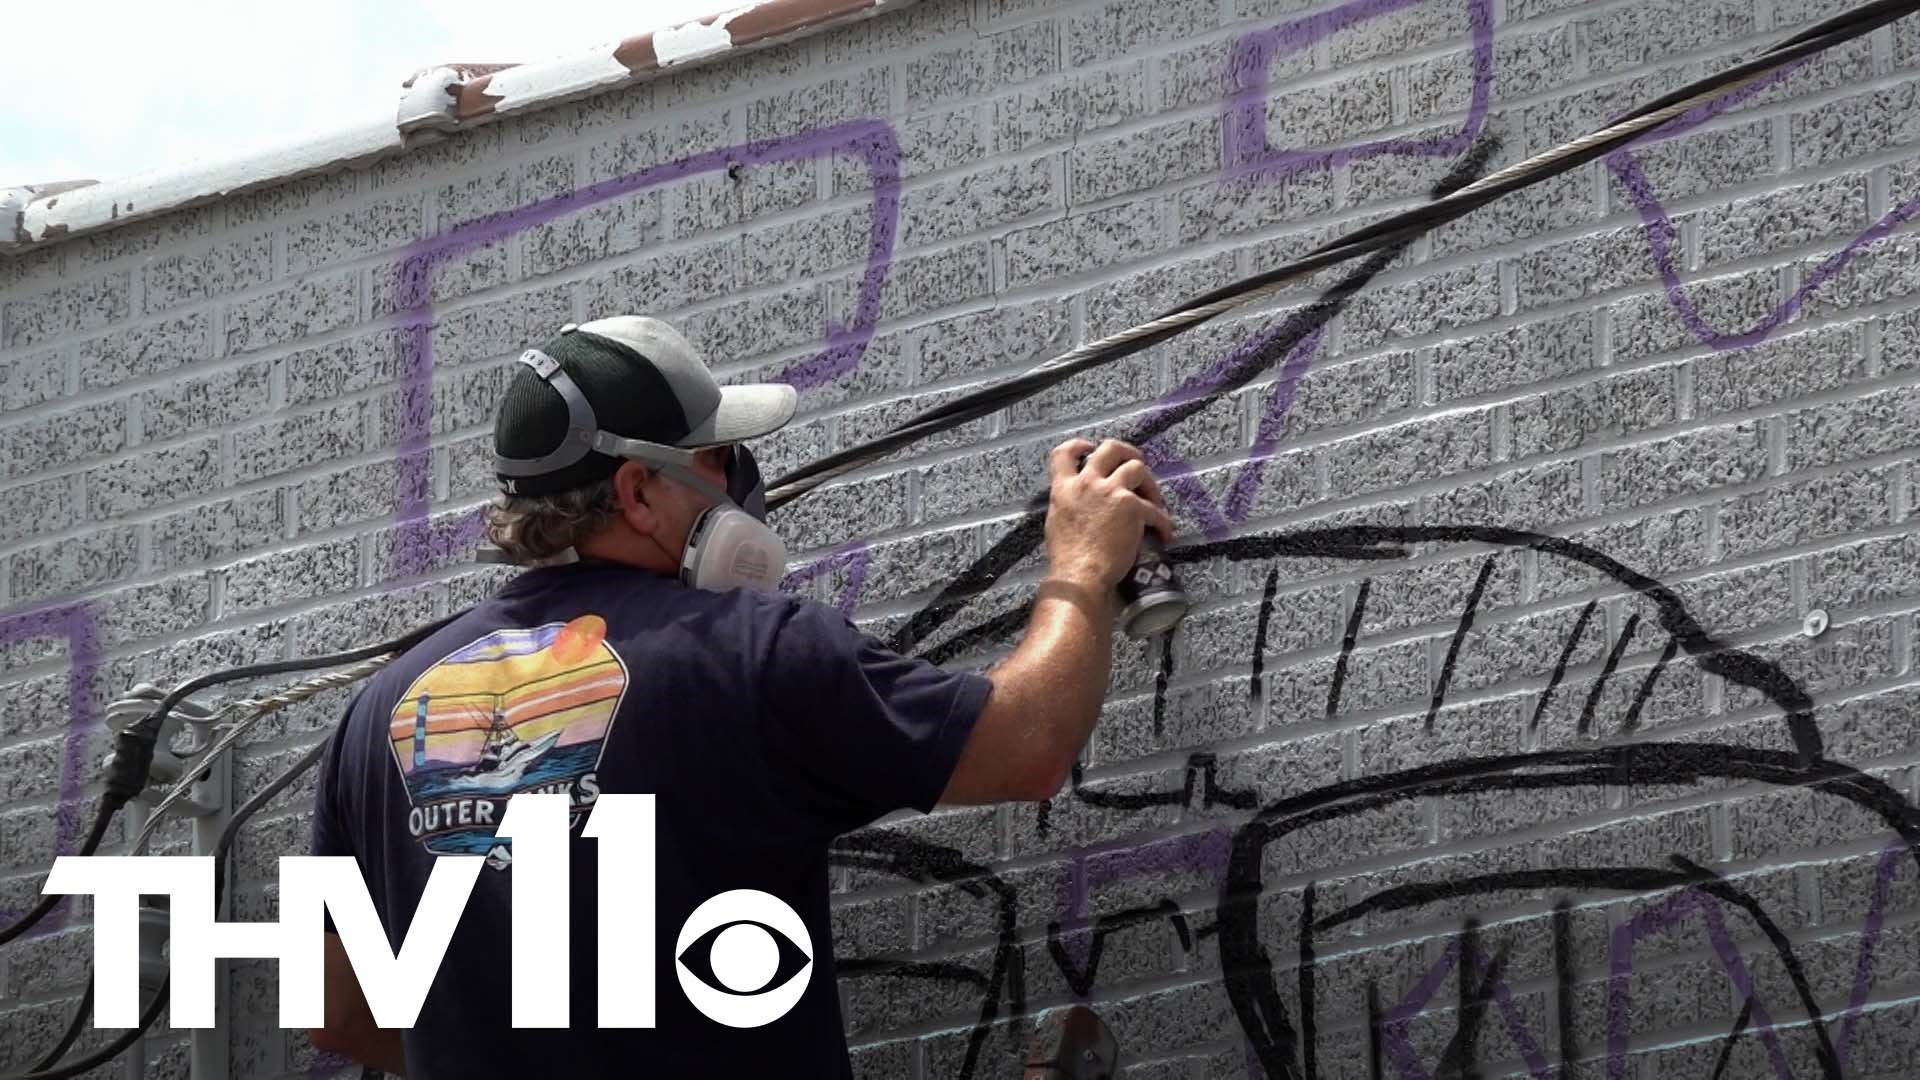 An art project in Fordyce, Arkansas is starting to get a lot of attention as a traveling artist is working to bring more murals to the state.